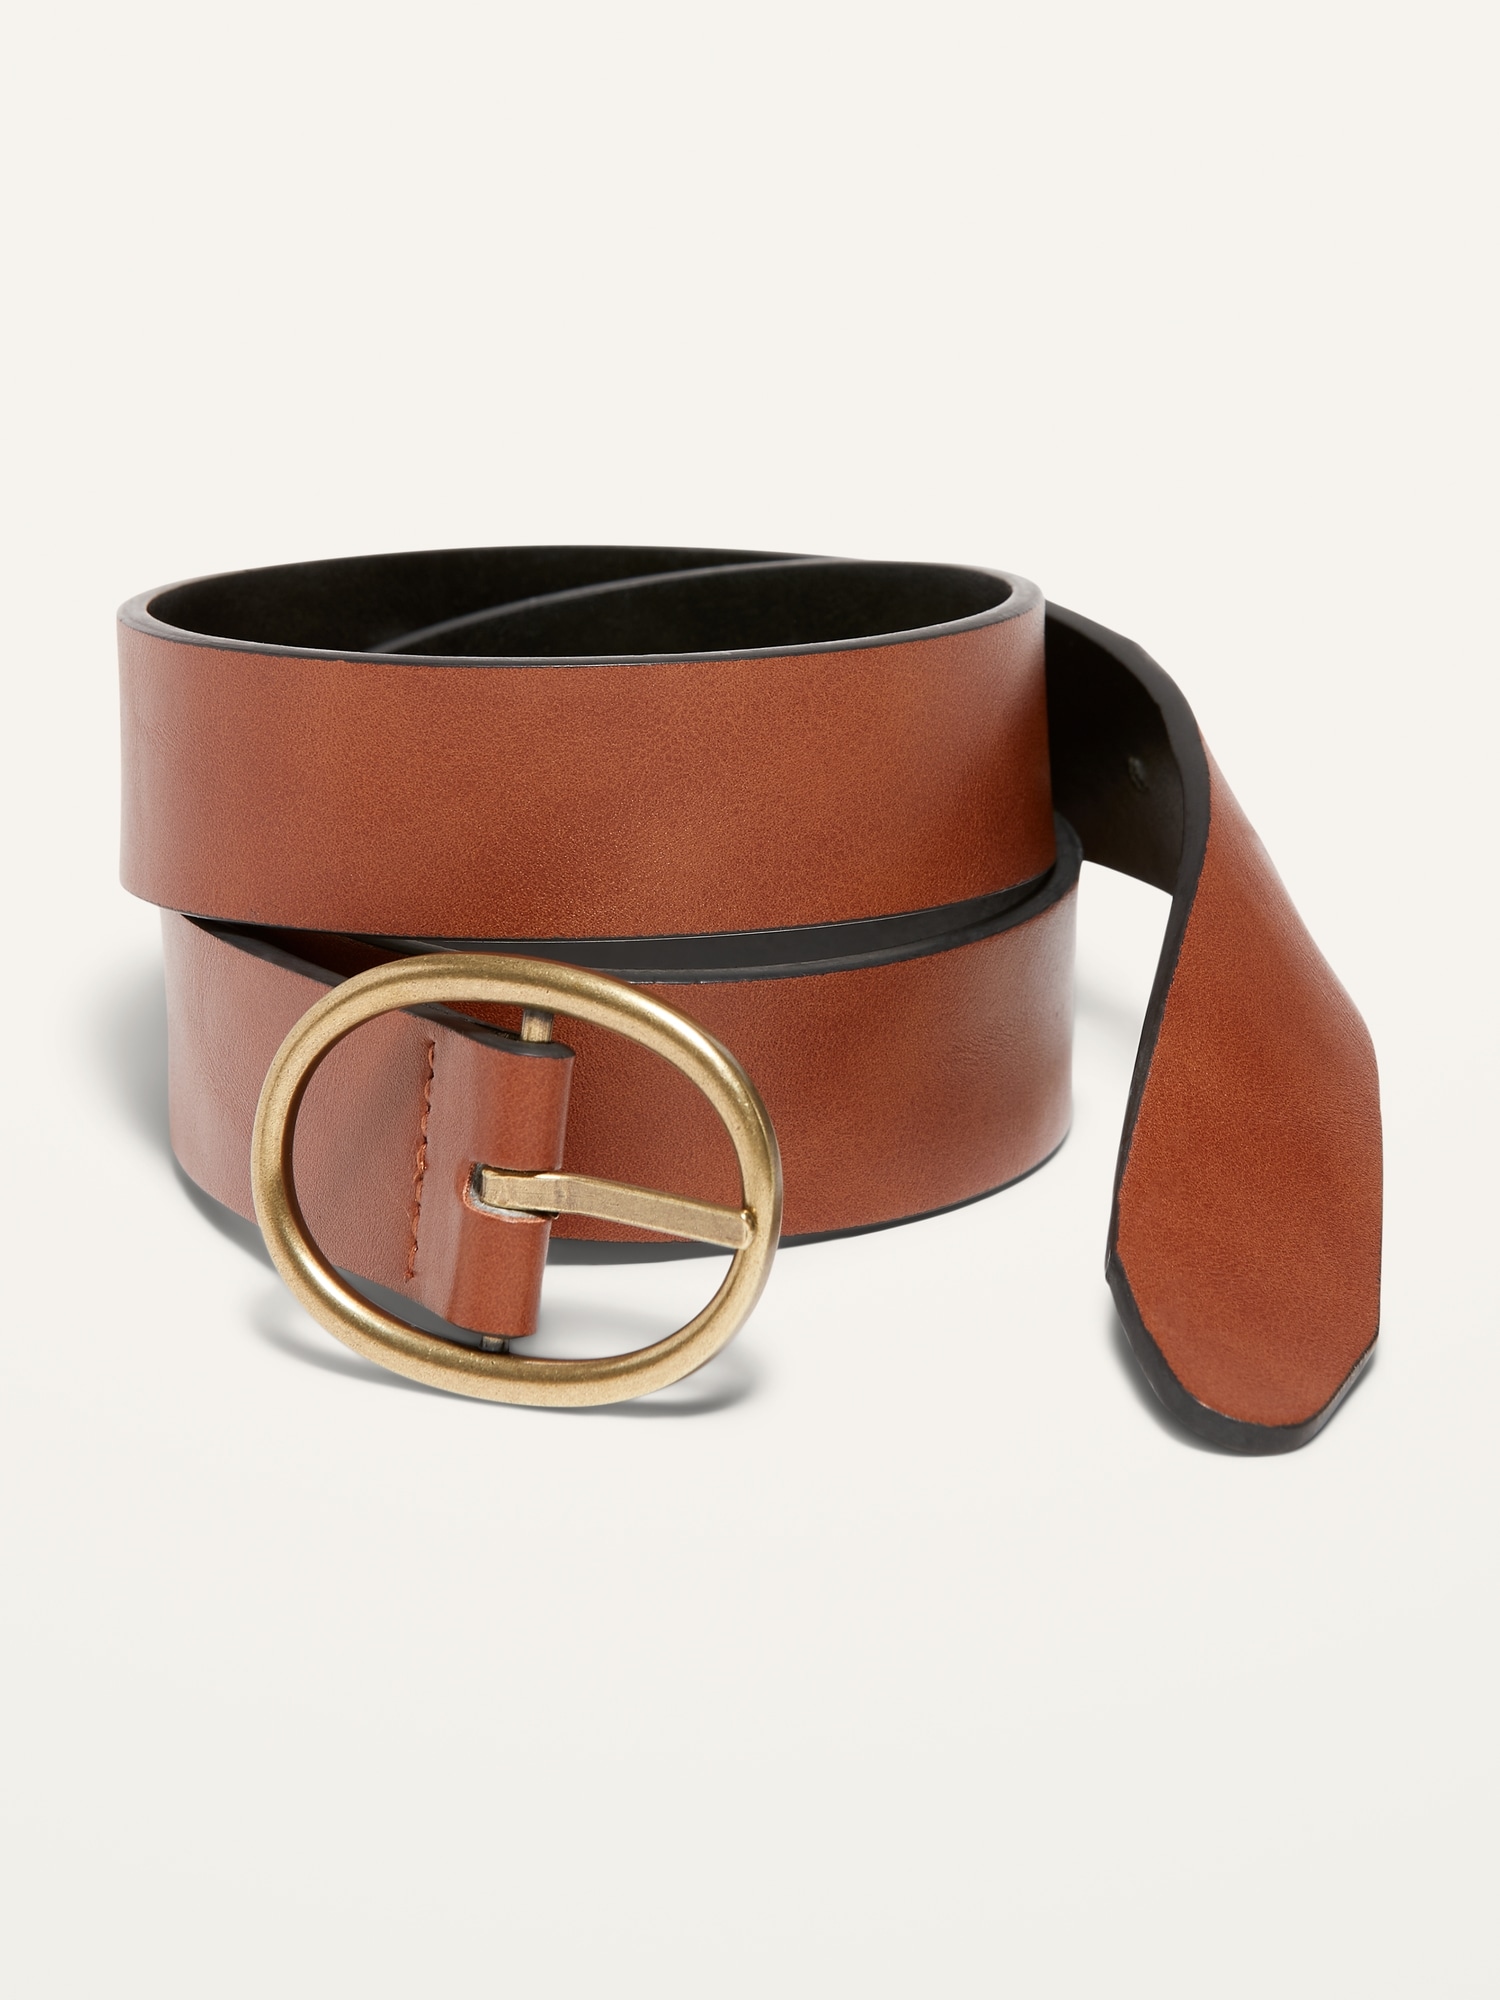 Old Navy Reversible Faux-Leather Belt For Women (1.25-Inch) multi. 1